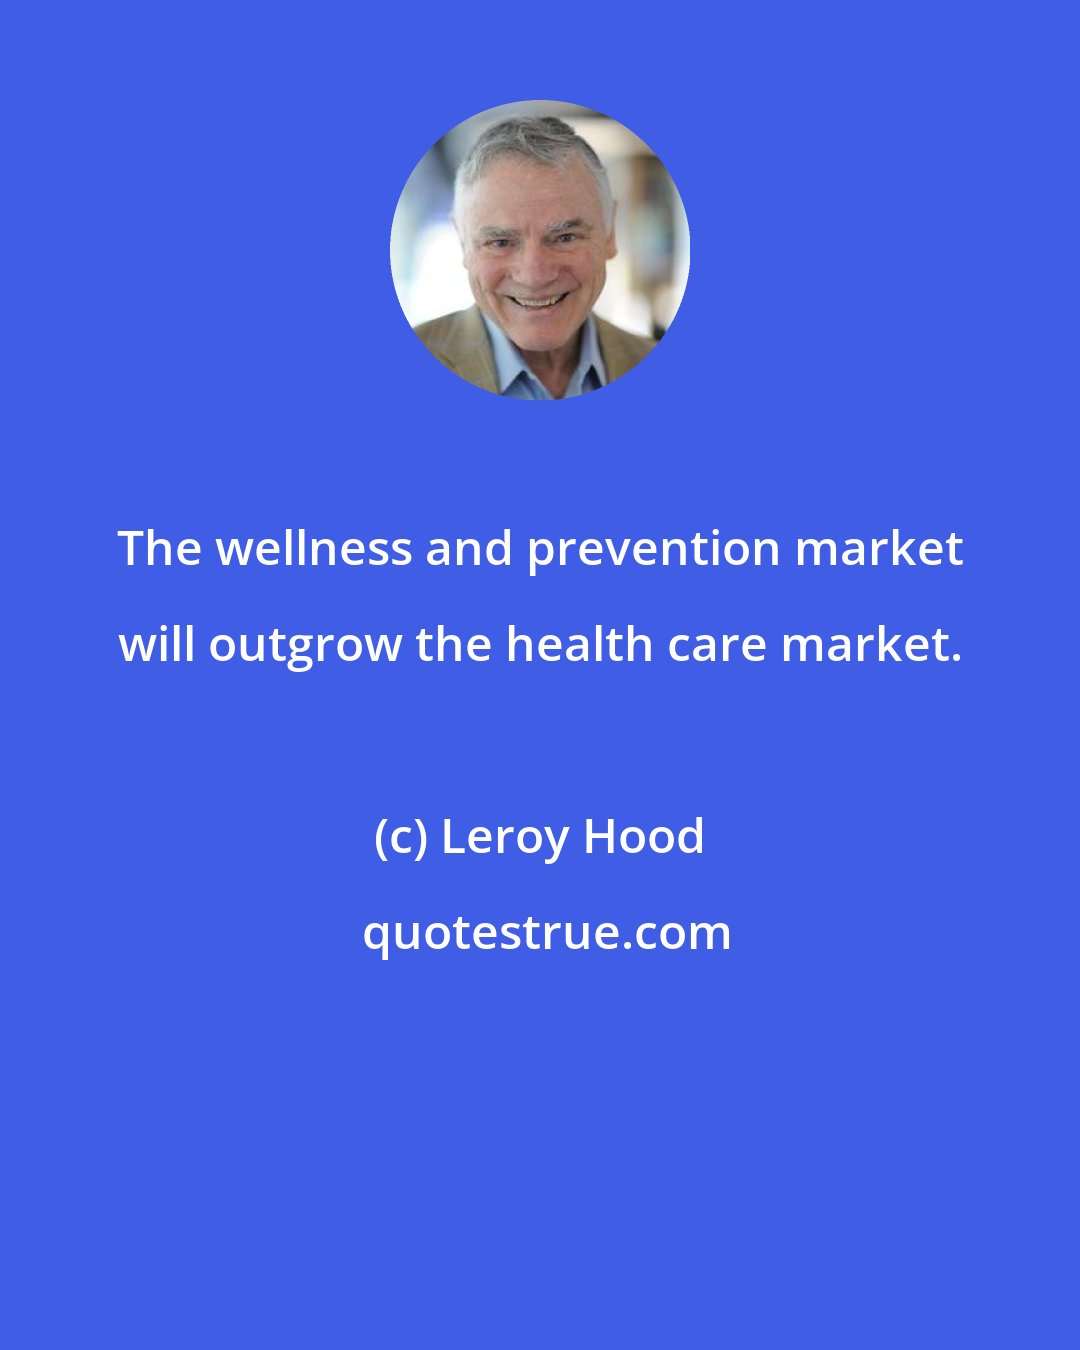 Leroy Hood: The wellness and prevention market will outgrow the health care market.